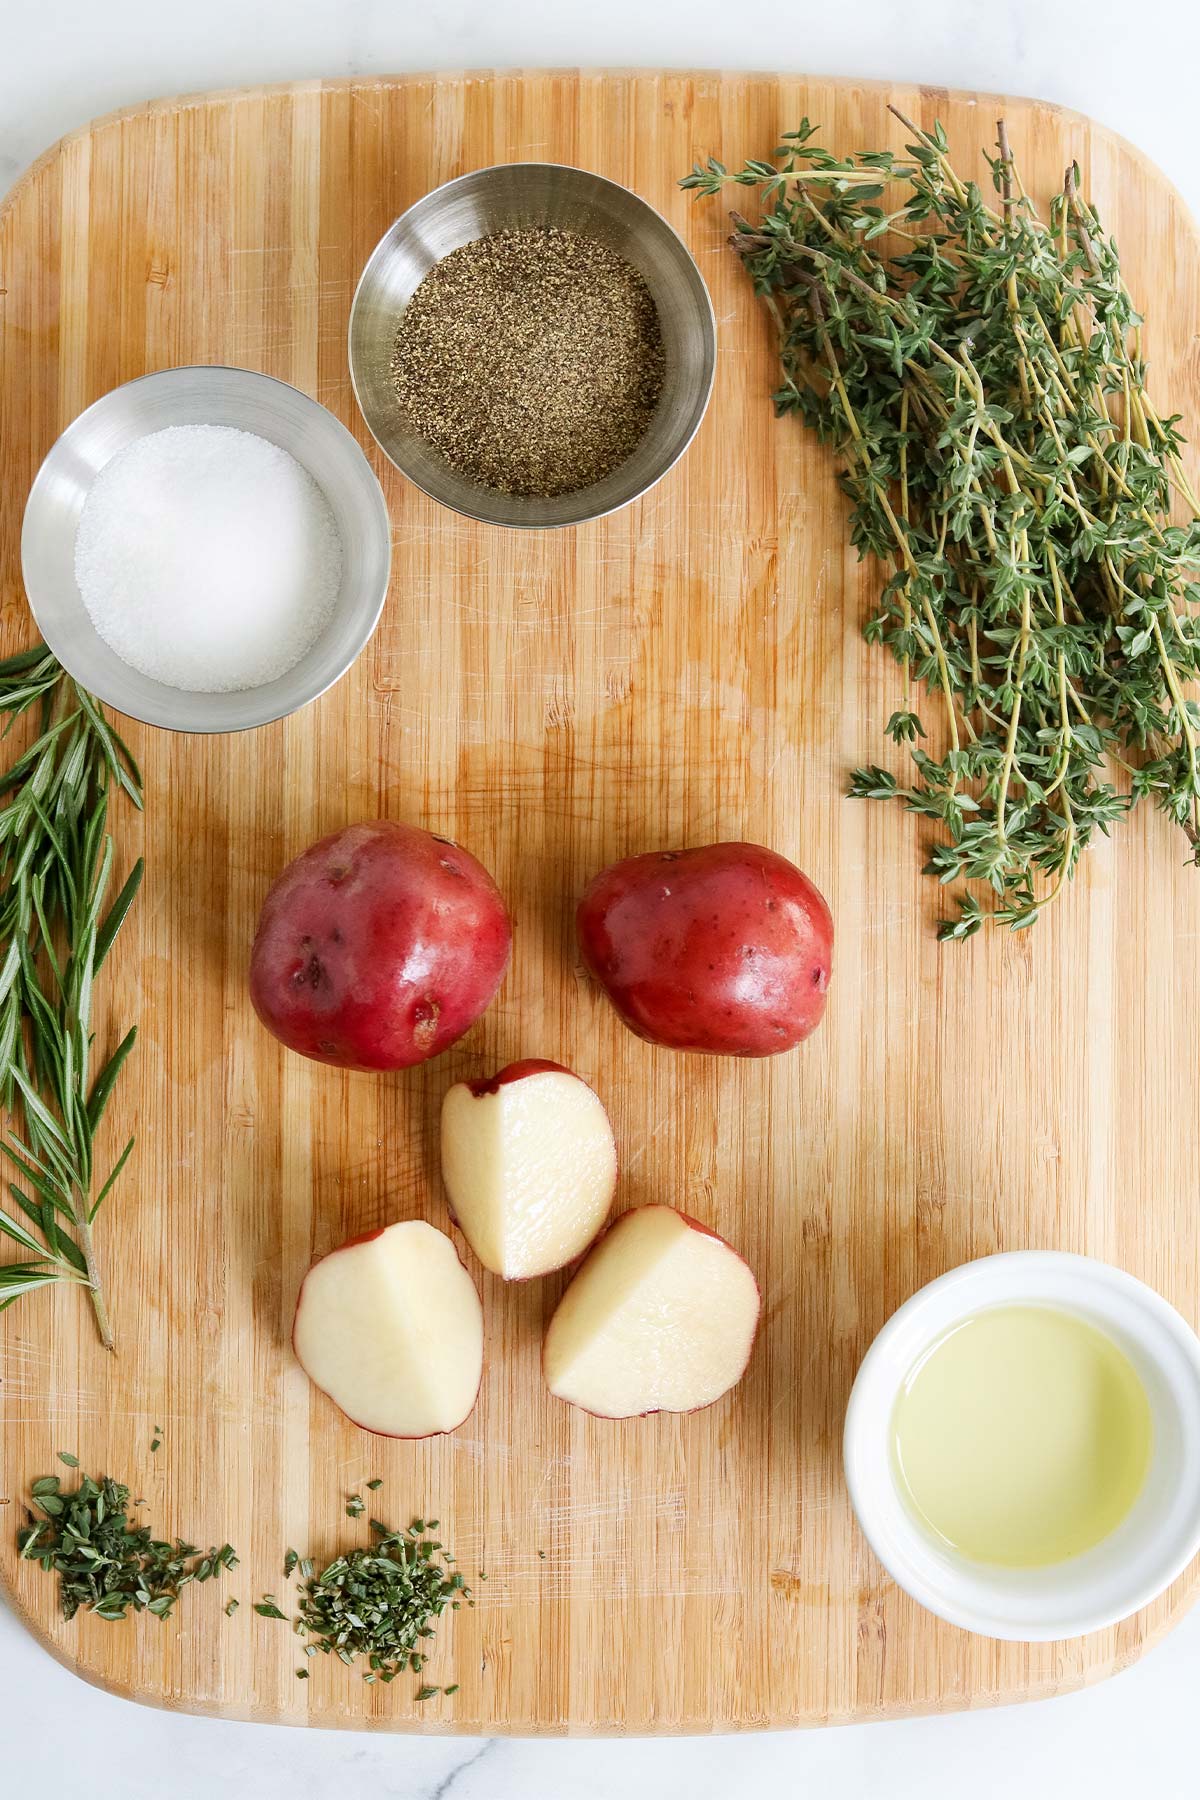 Ingredients to make roasted rosemary potatoes.